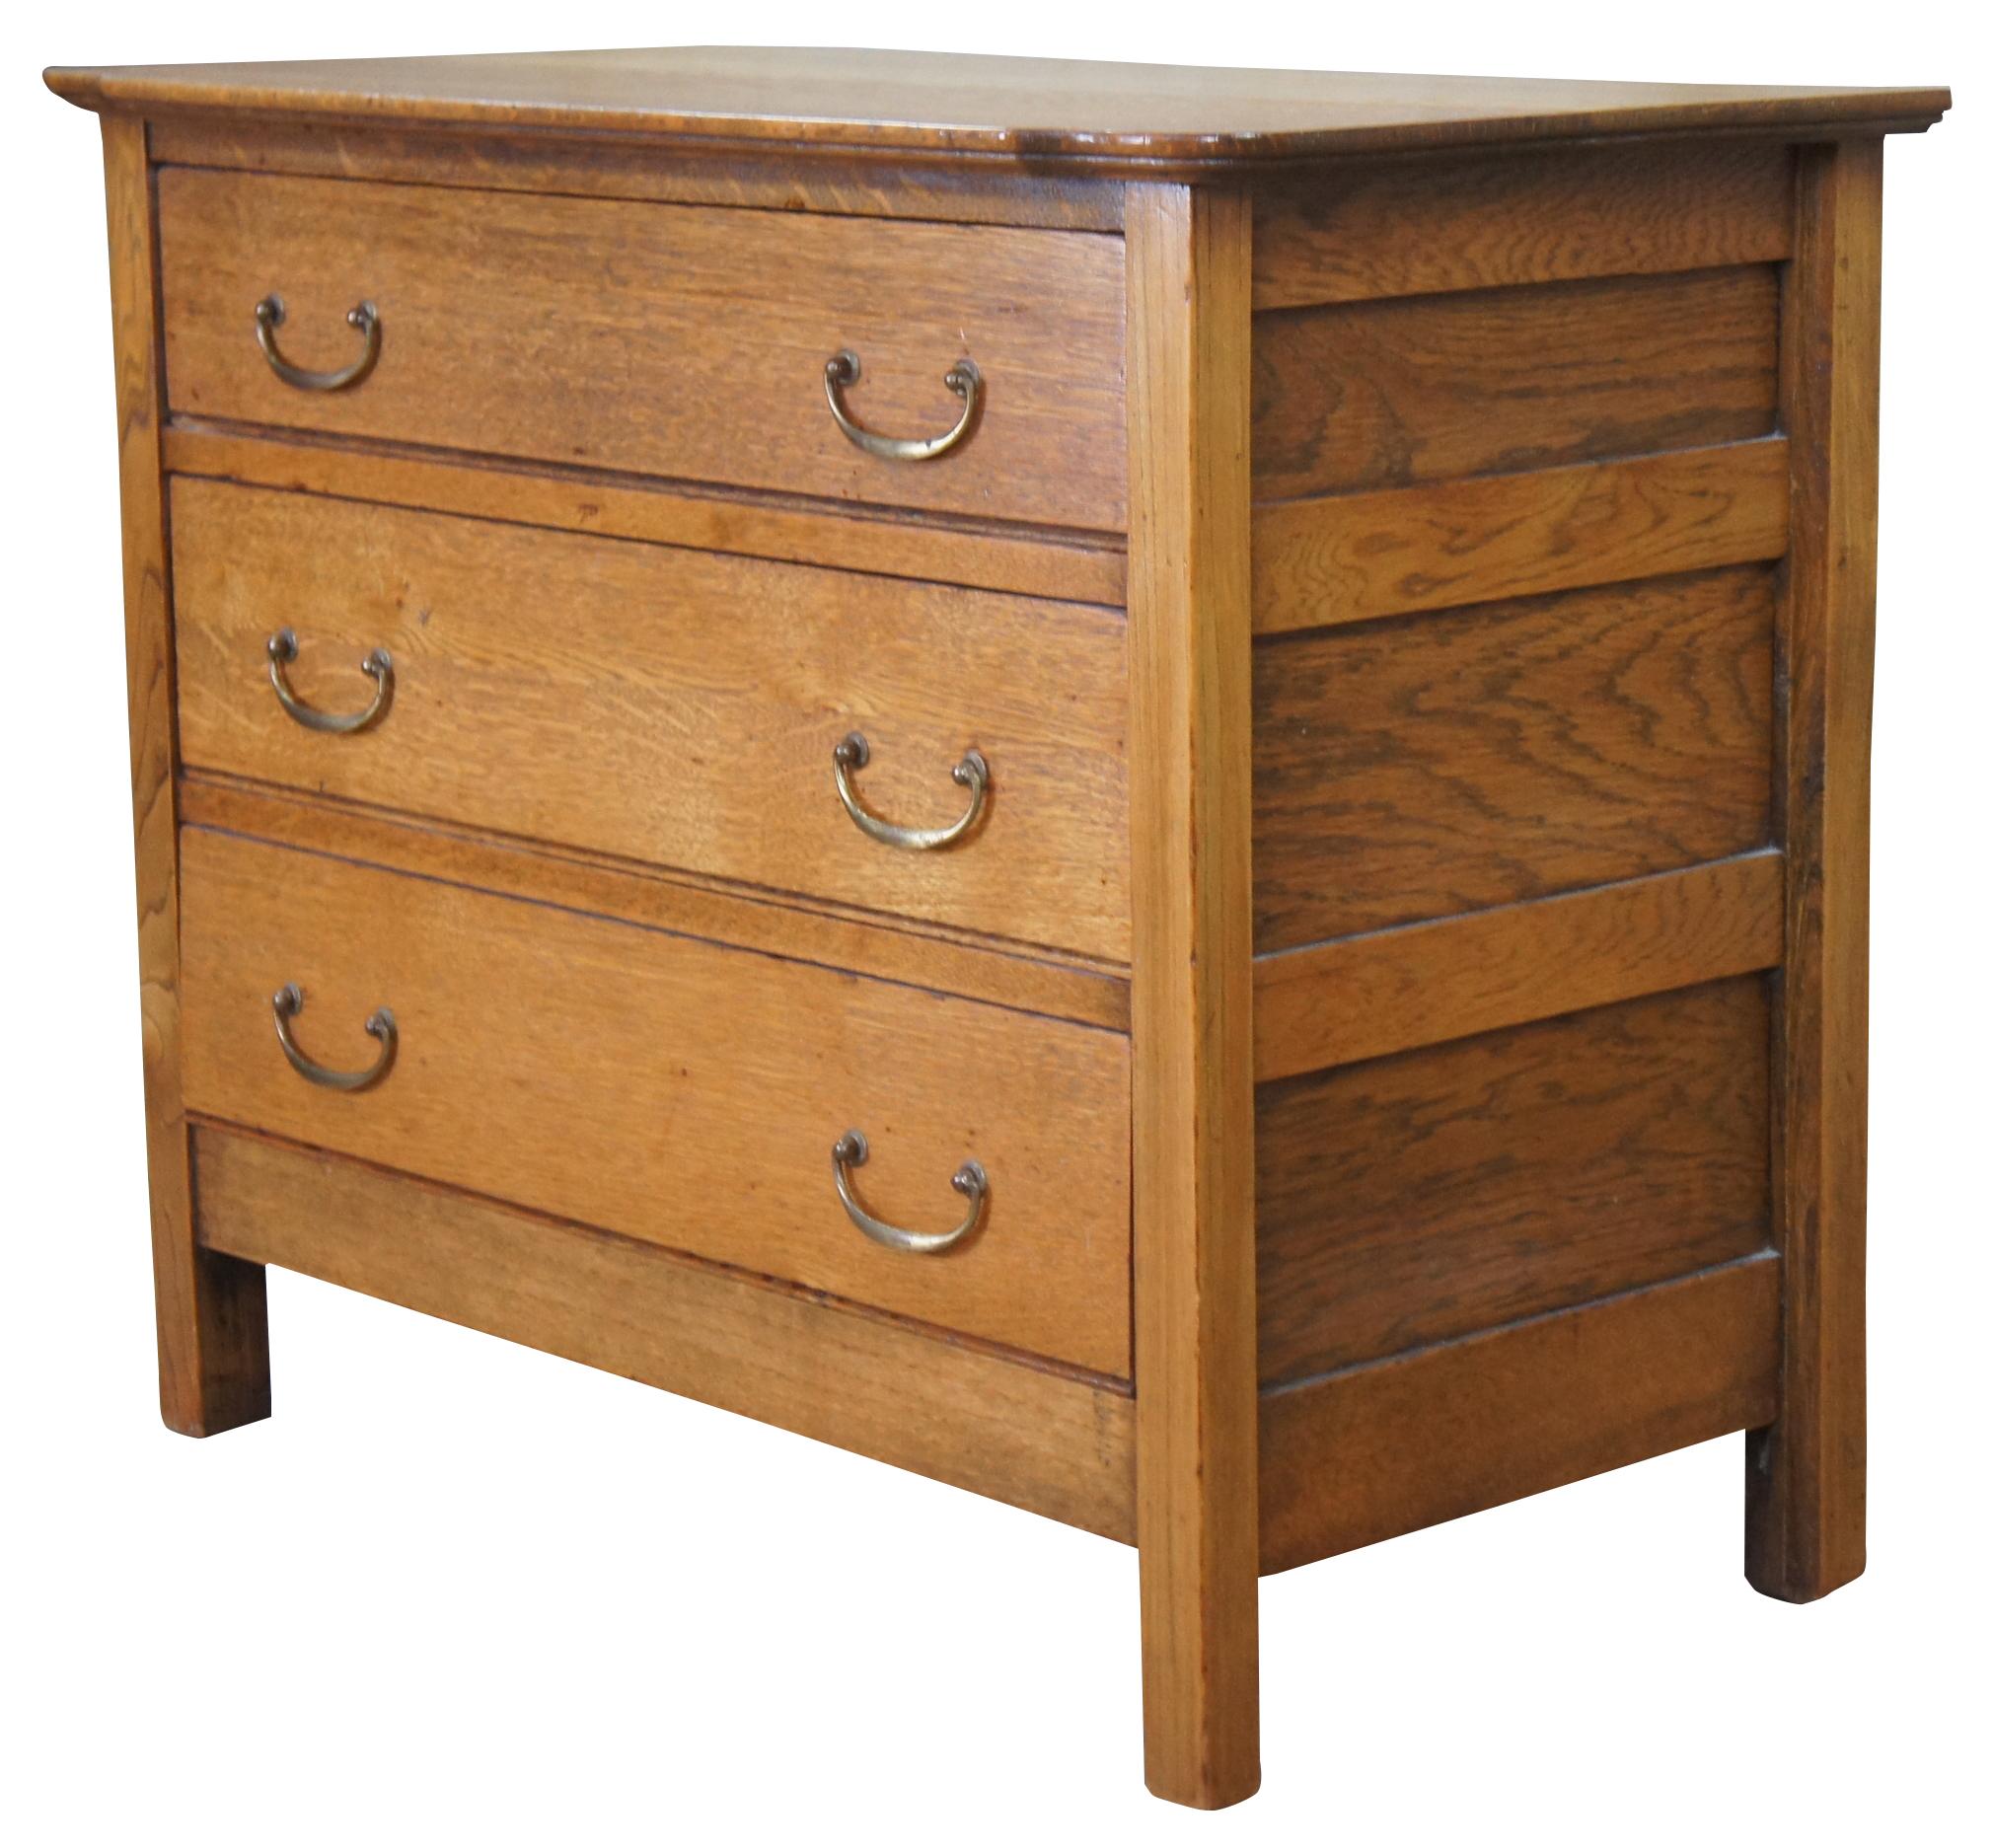 Antique Victorian dresser or chest of drawers. Made of oak featuring three drawers with brass pulls, panelled sides and serpentined front top corners. Measure: 33